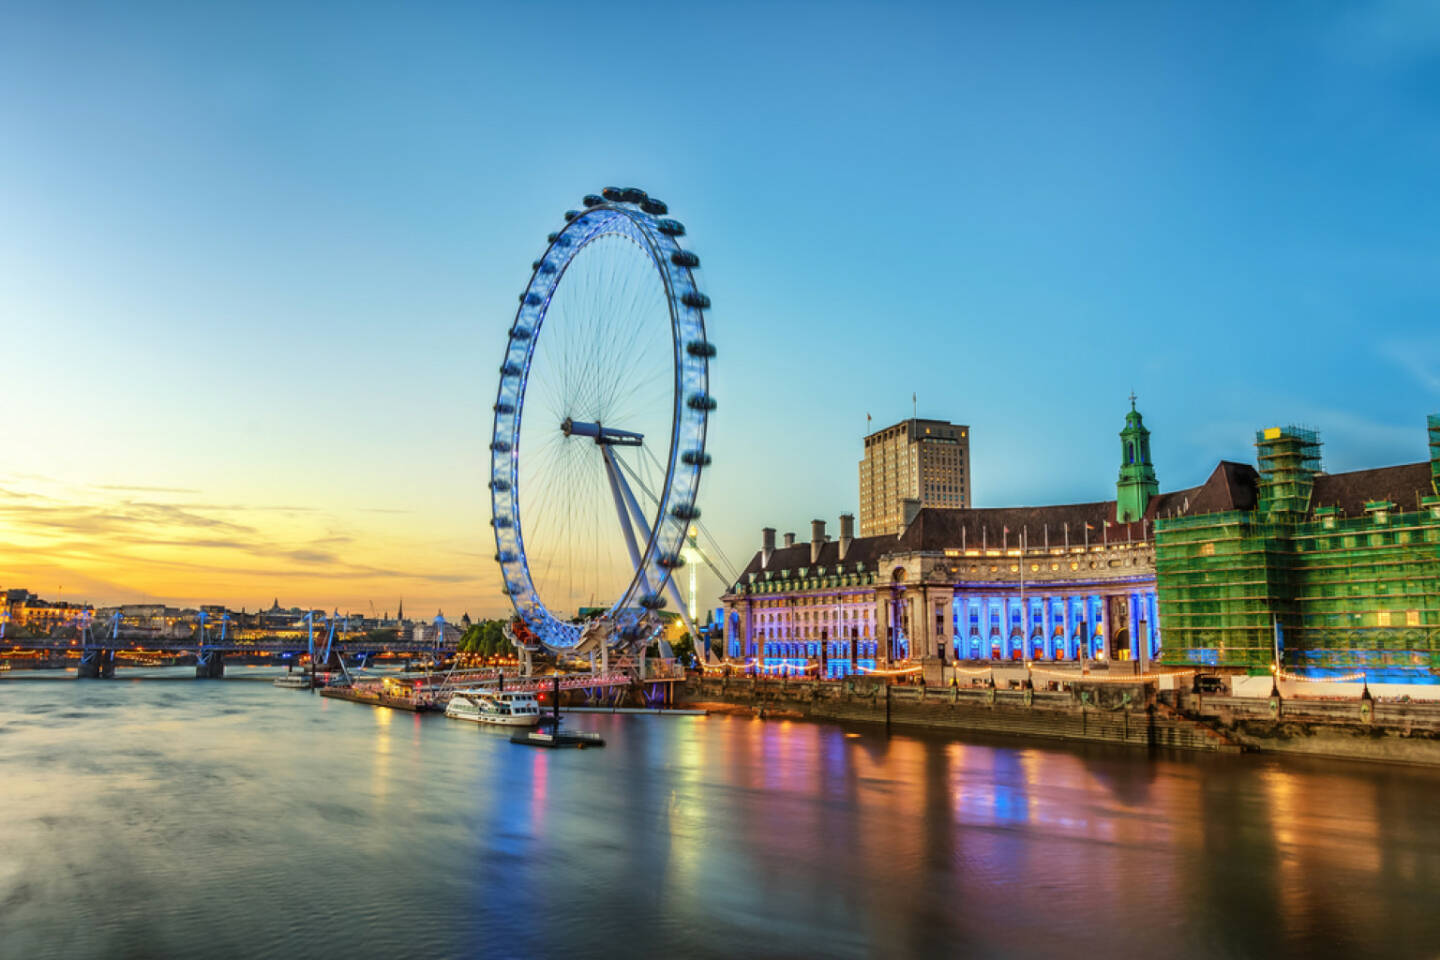 London Eye, http://www.shutterstock.com/de/pic-155068436/stock-photo-the-london-eye-on-the-south-bank-of-the-river-thames-at-night-in-london-england.html 